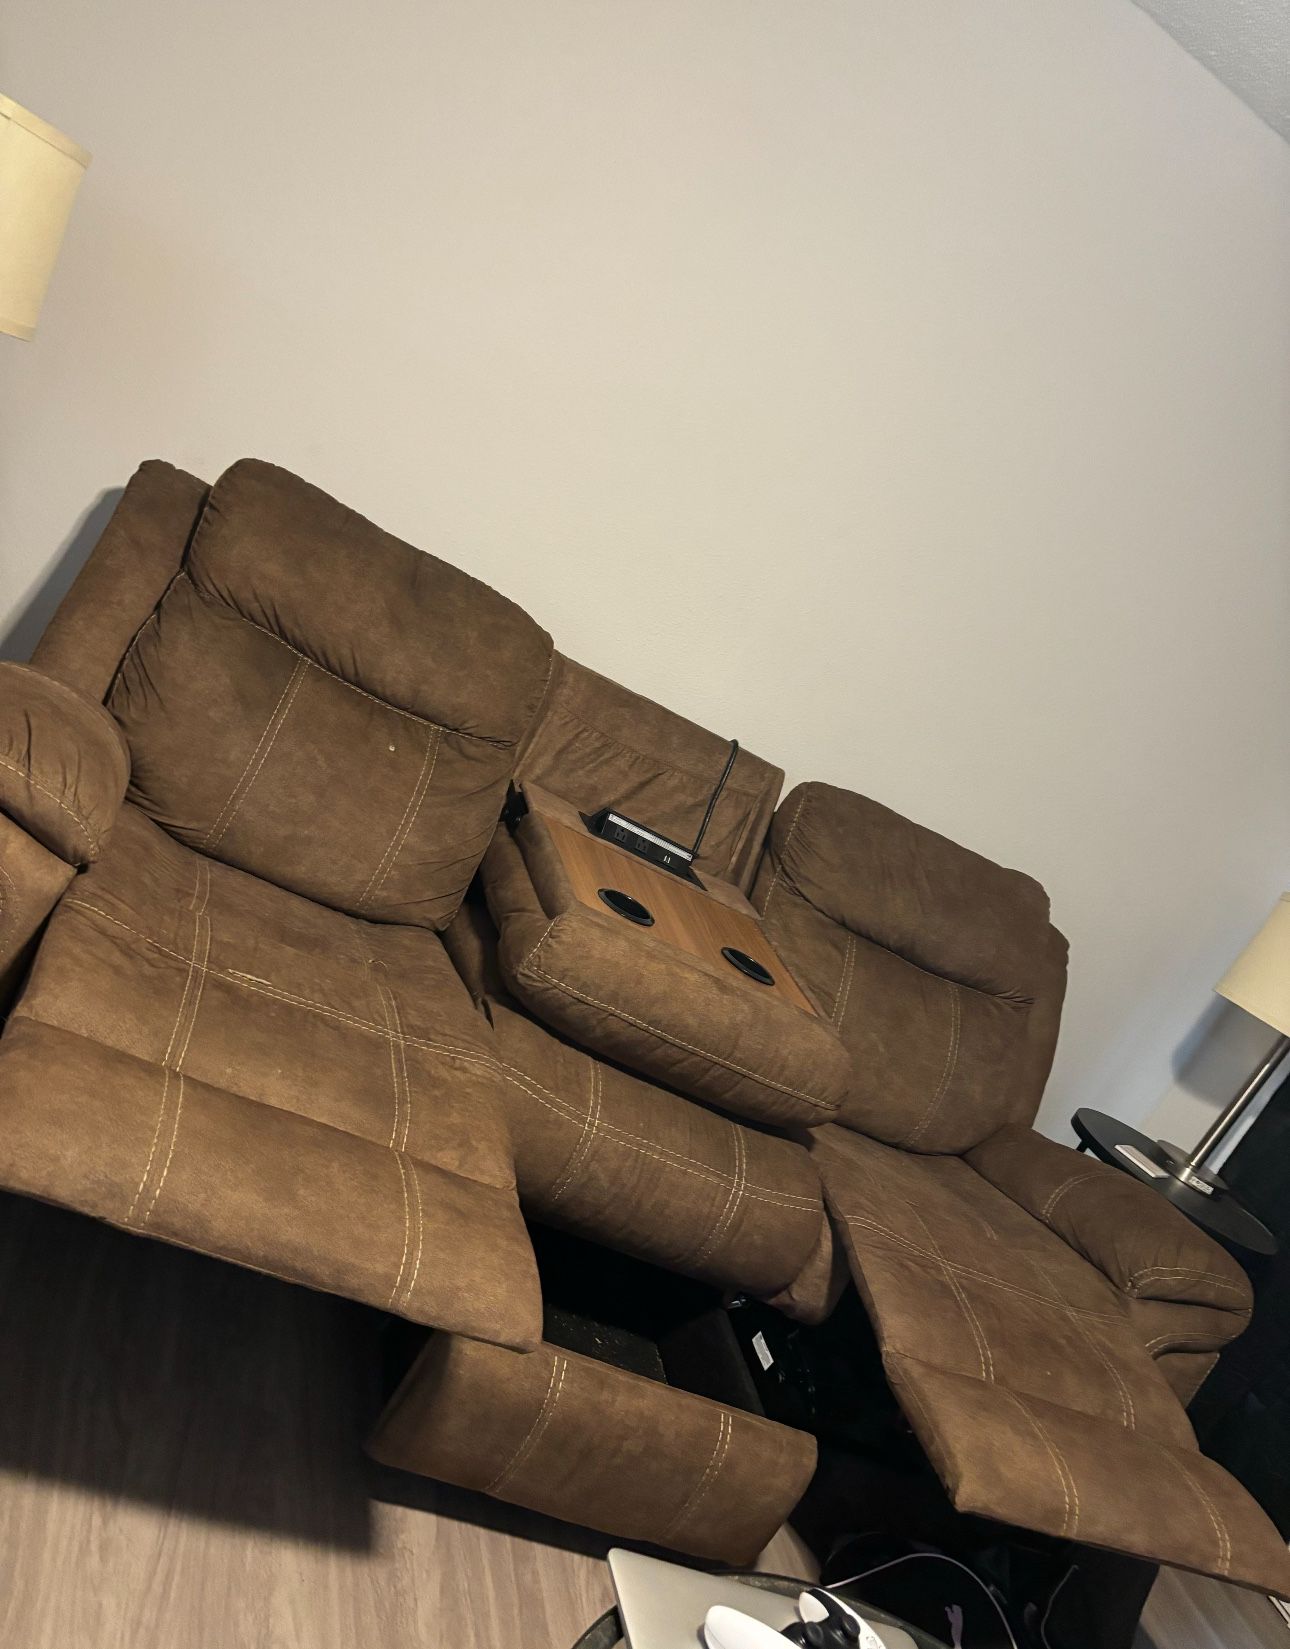 Three Seat Dual Recliner Couch